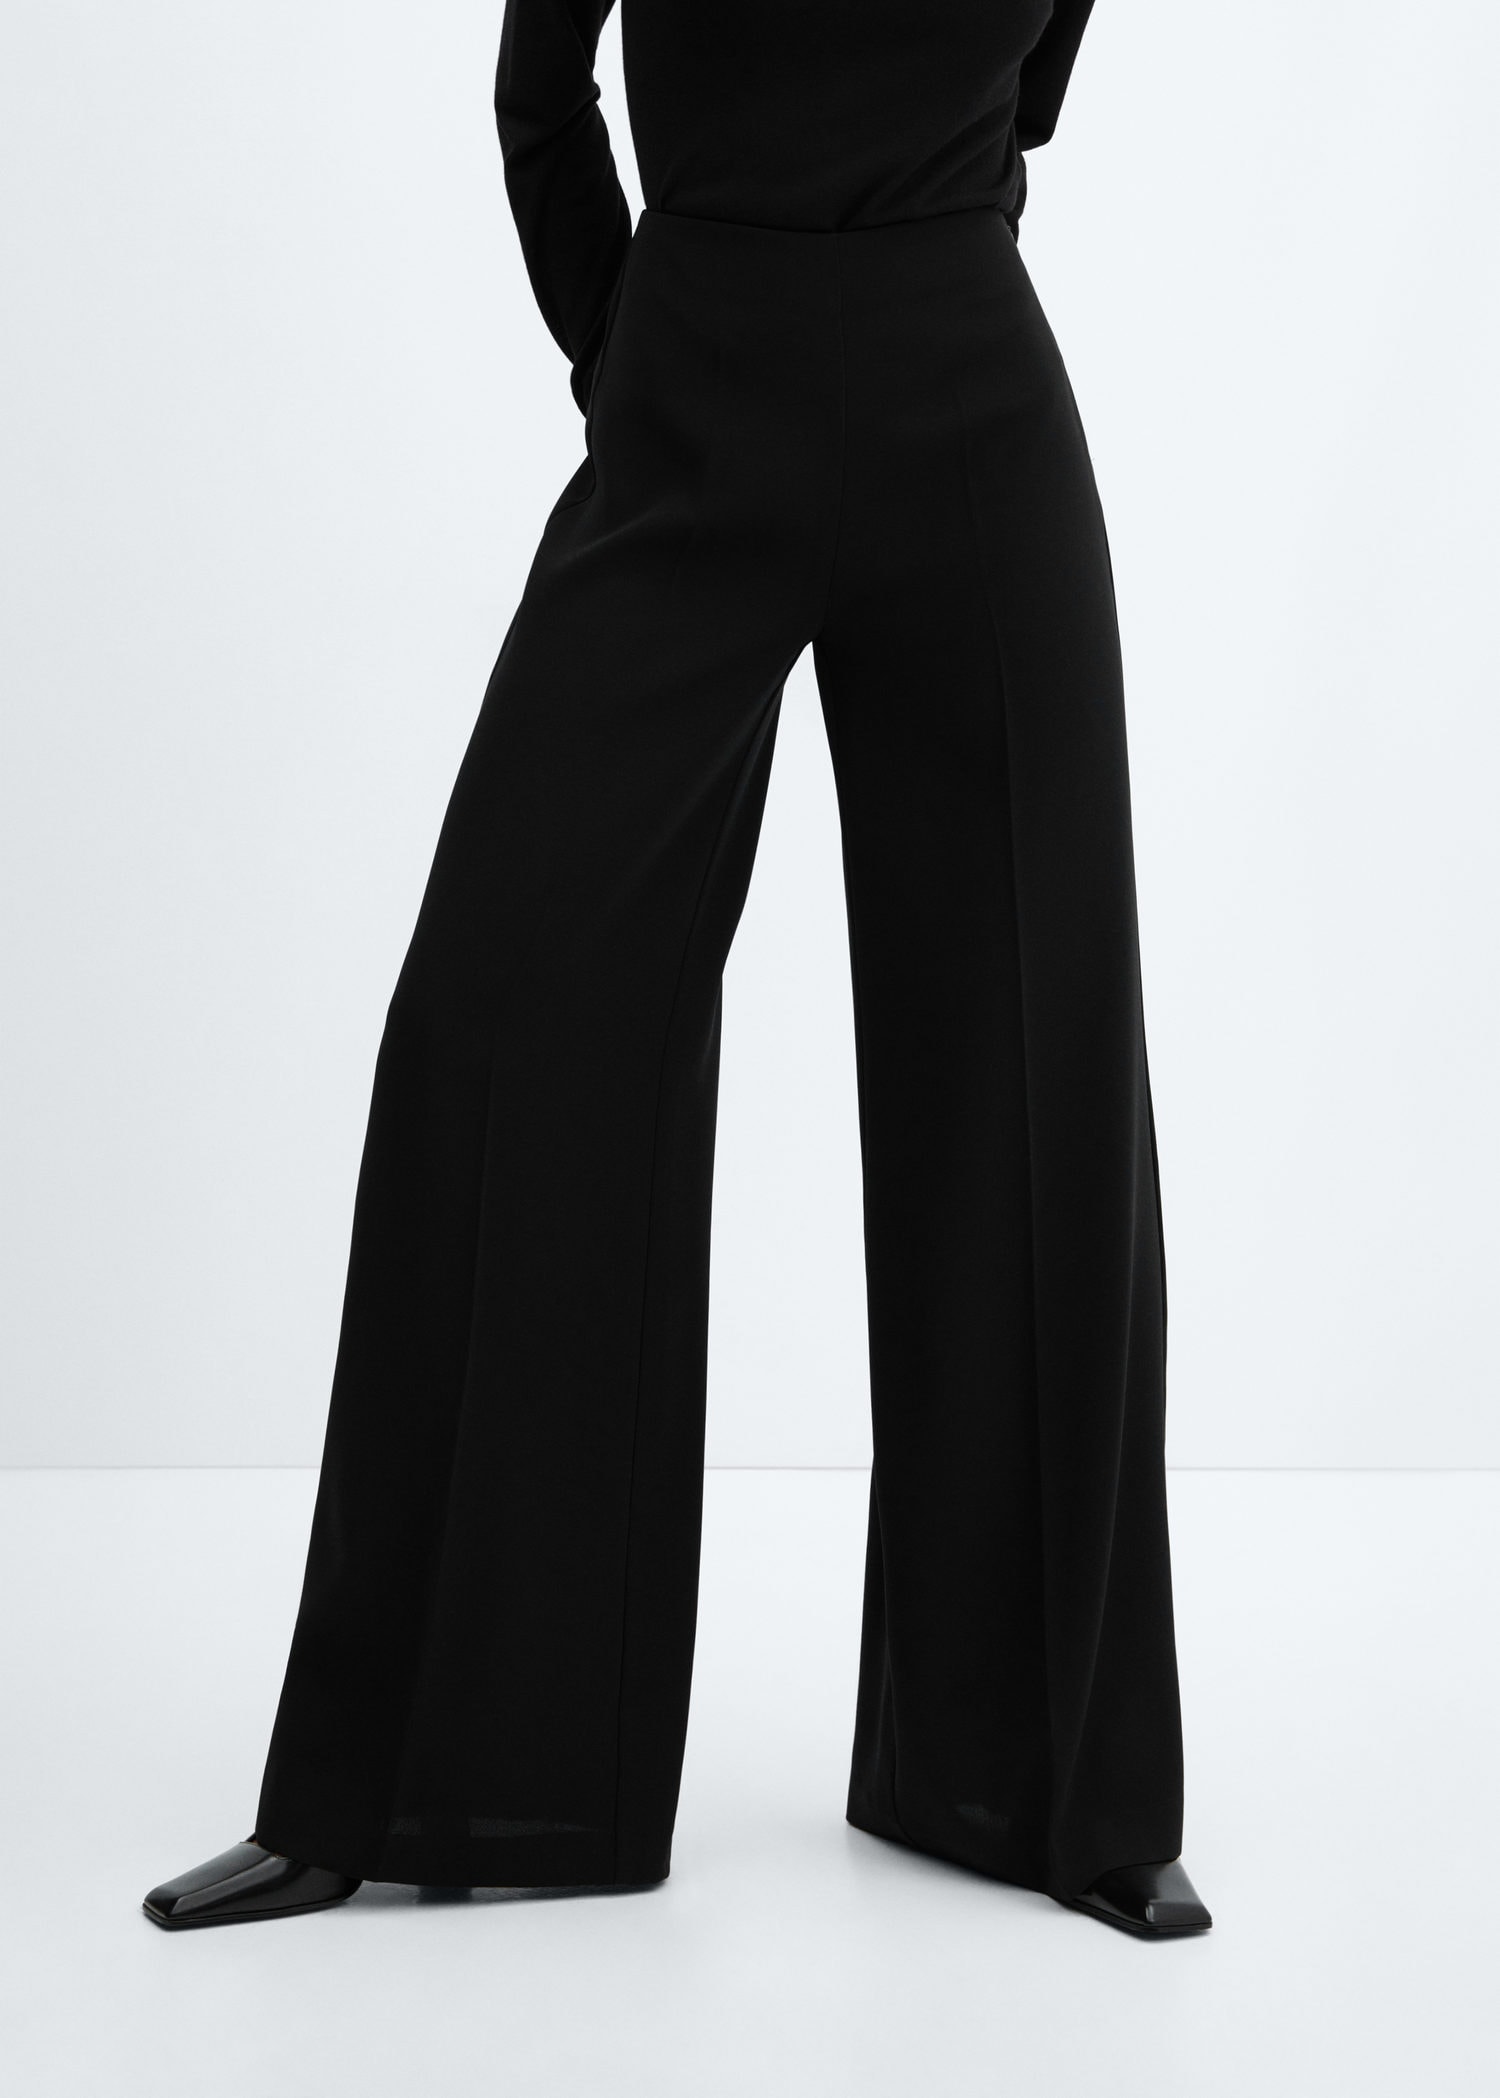 Bell Bottoms For Women High Waisted Wide Leg Palazzo Pants